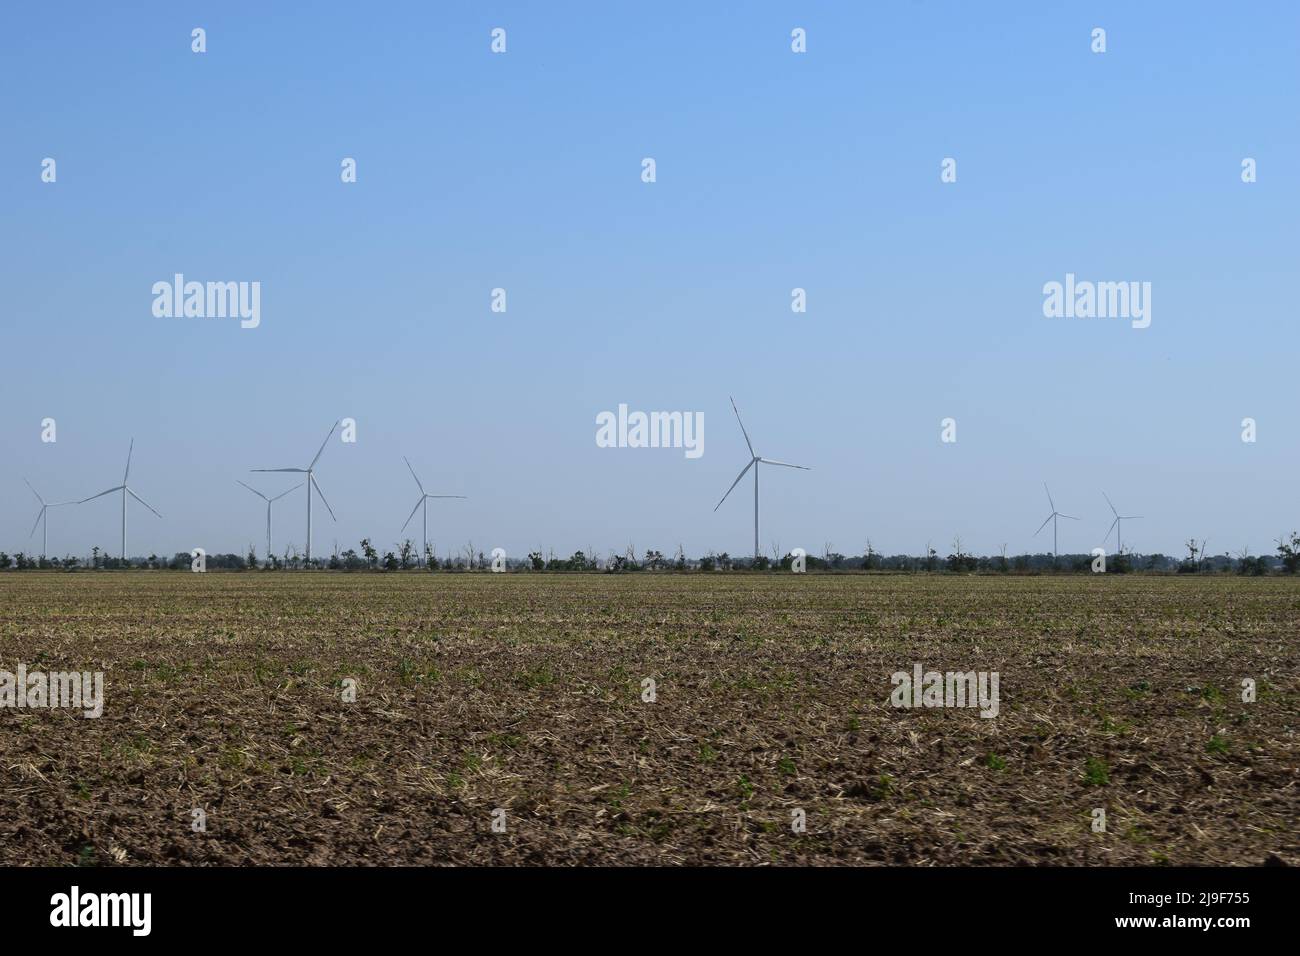 A field of windmills spin in front of a colorful evening sky. A wind turbine is used to produce electricity. Wind energy is the use of wind for electr Stock Photo